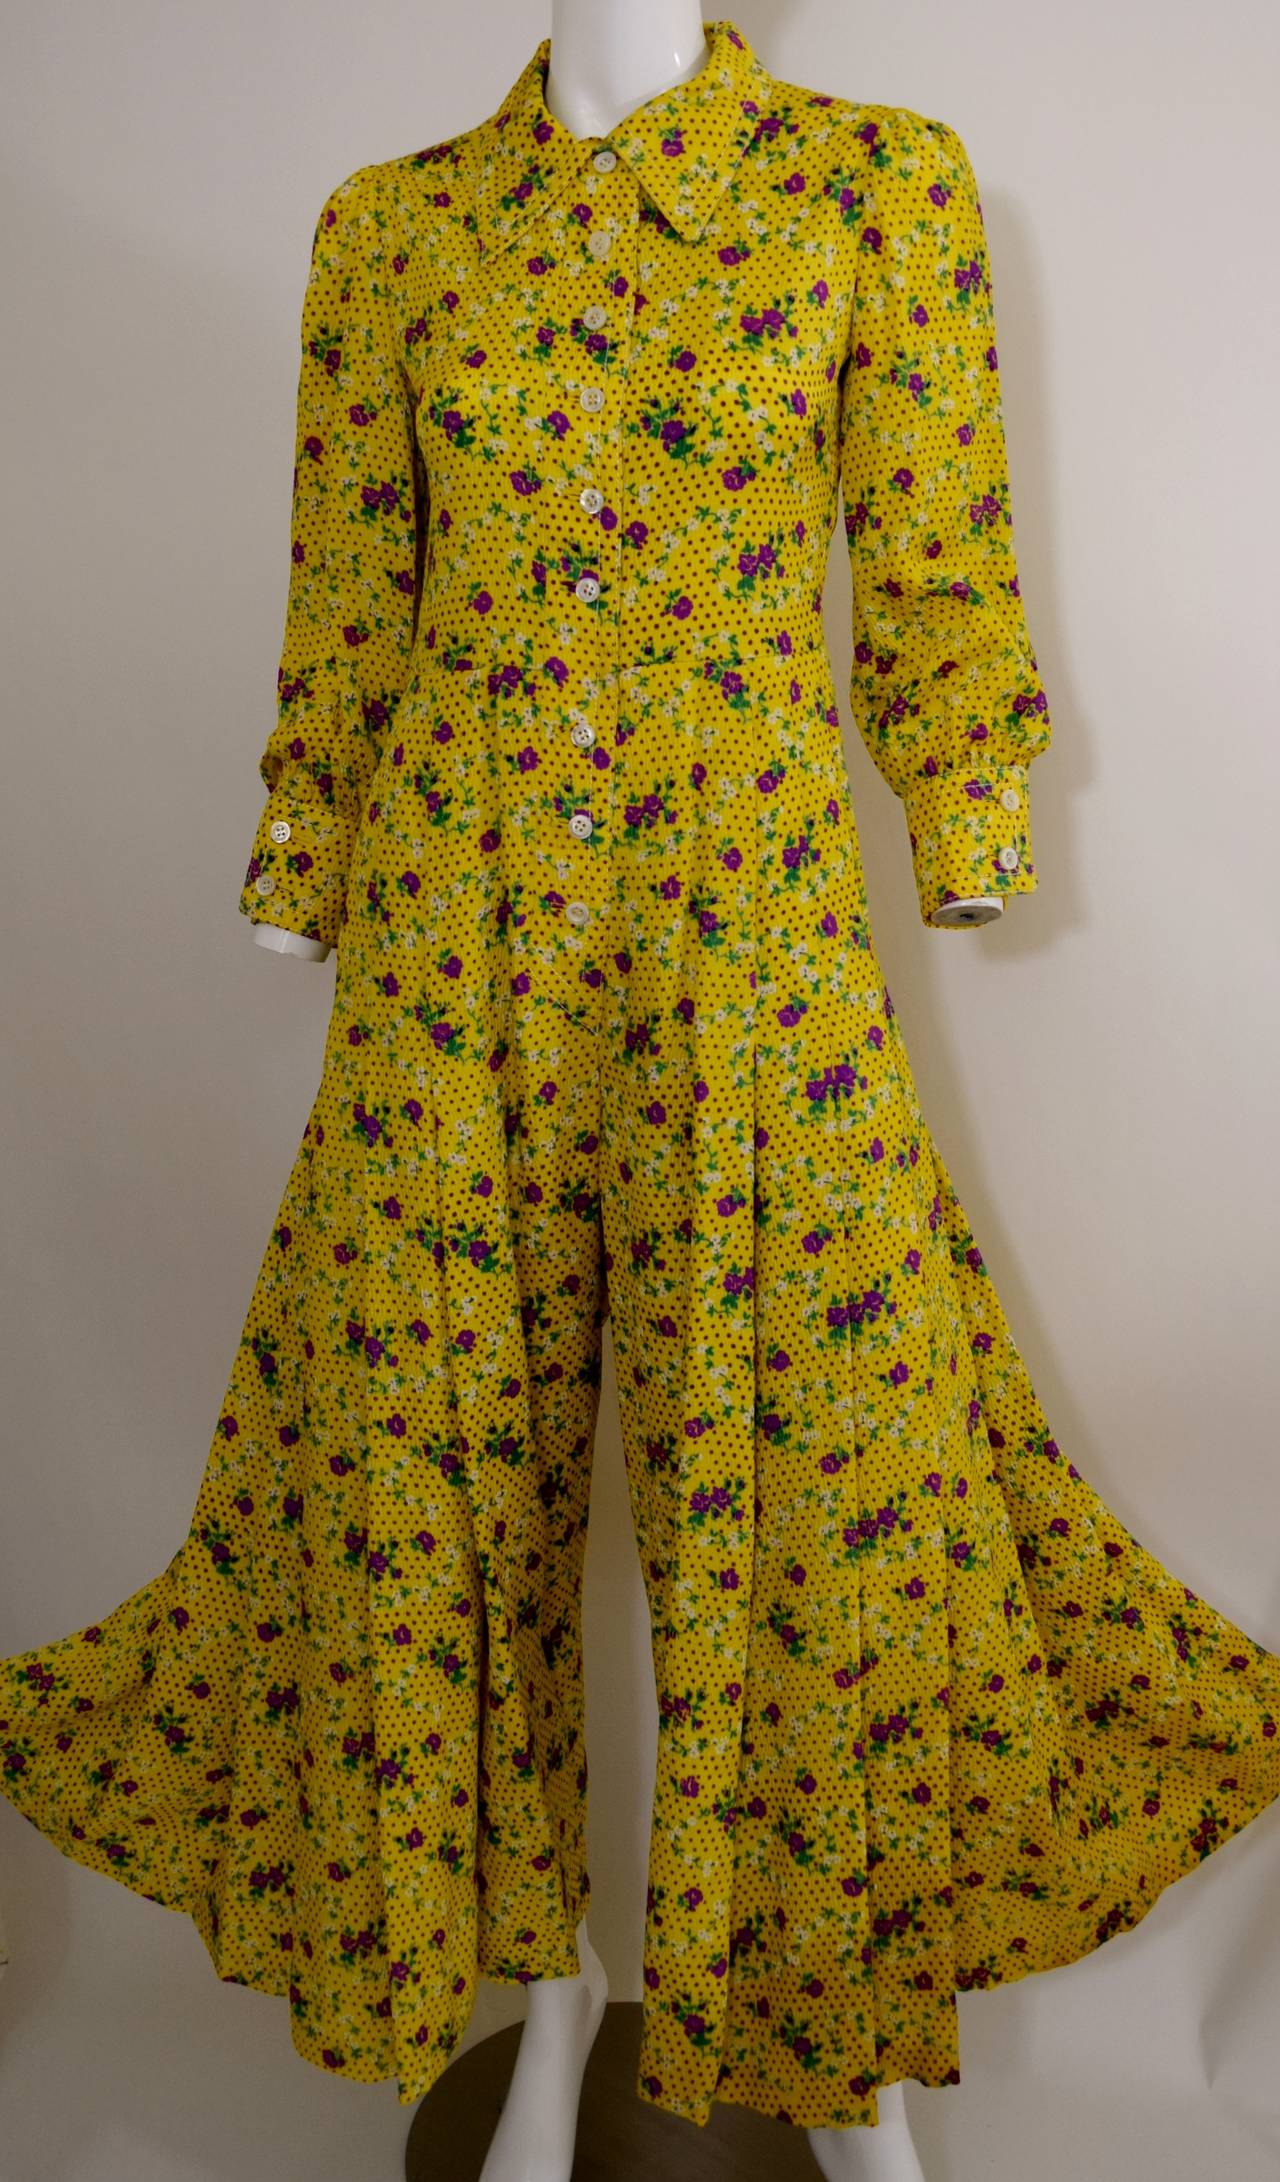 A fantastic Galanos 1970s yellow floral printed silk jumpsuit. The label has fallen out, guaranteed a Galanos, sold a dress with the Galanos label in the same print.
Long sleeves. button front. pointed collar. wide leg.
Excellent